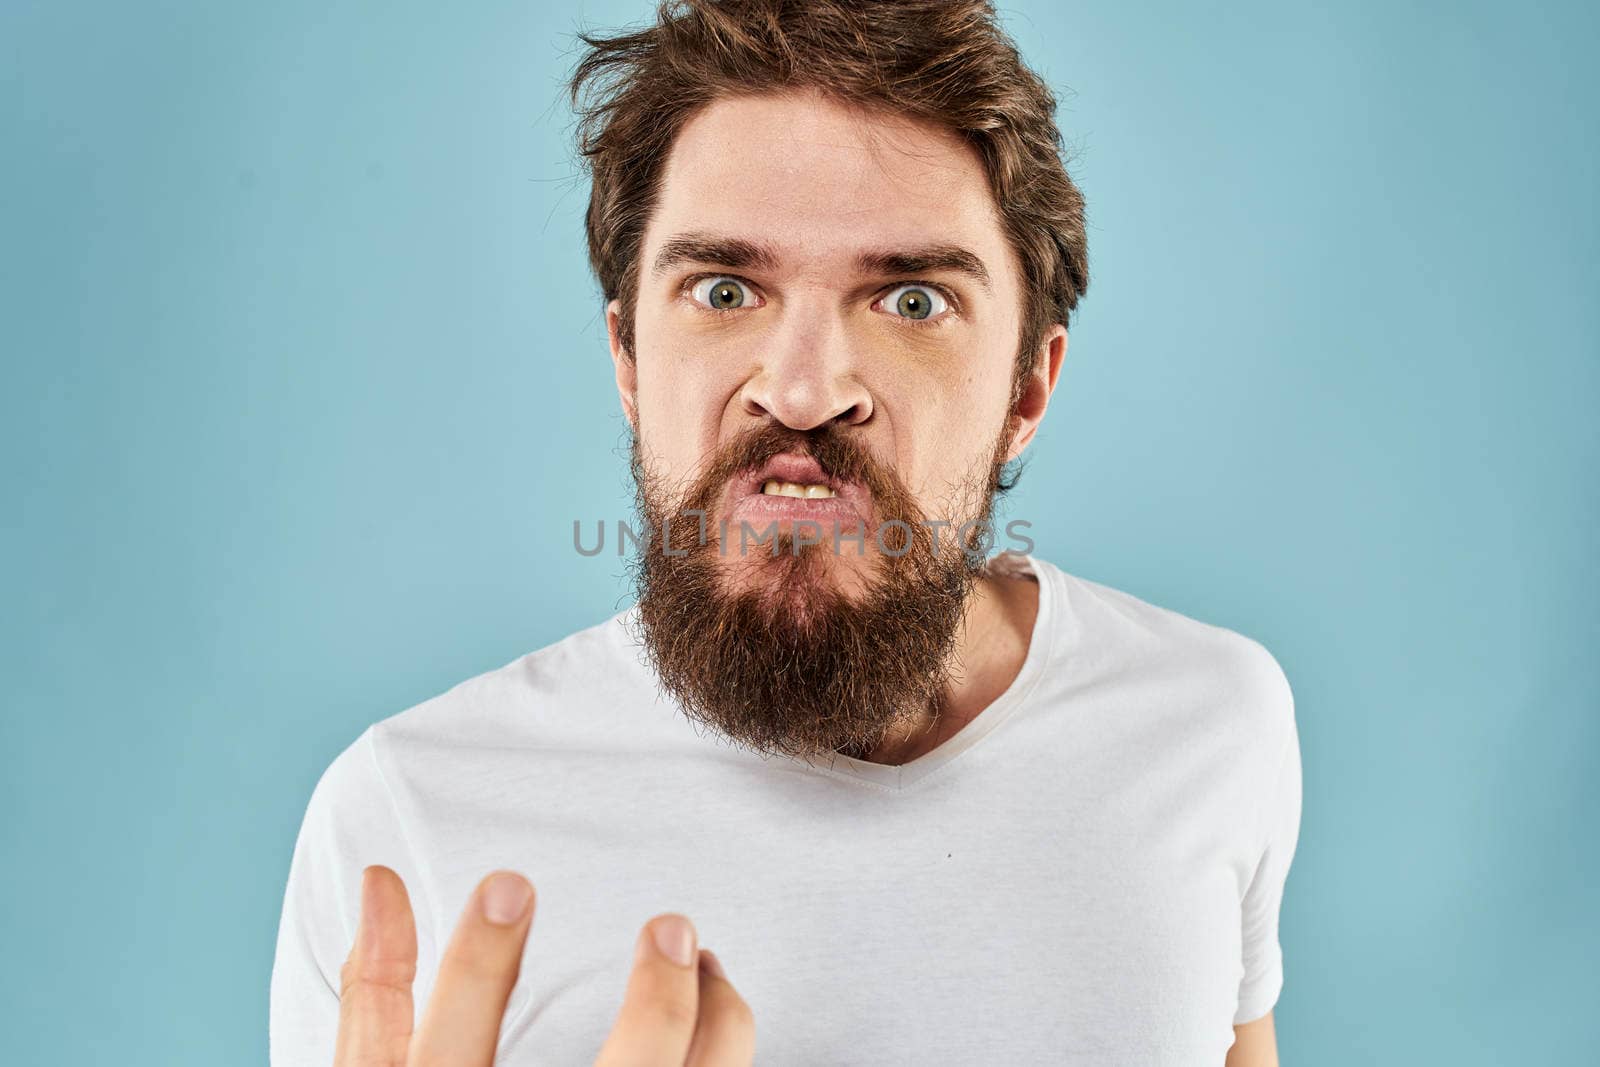 Man with disgruntled facial expression gesturing with hands studio lifestyle blue background by SHOTPRIME